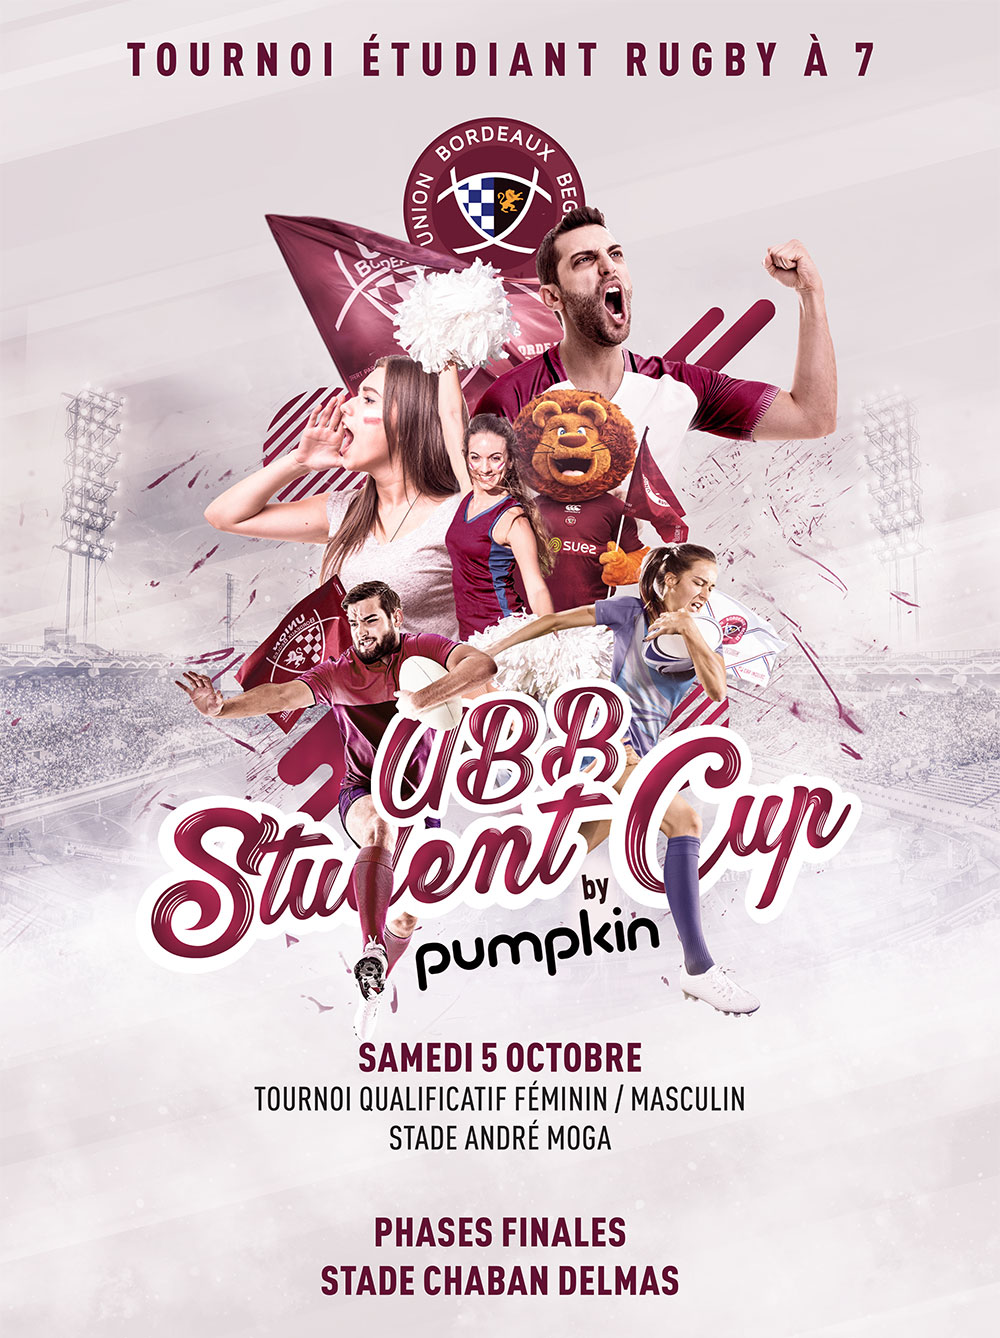 UBB Student Cup by Pumpkin